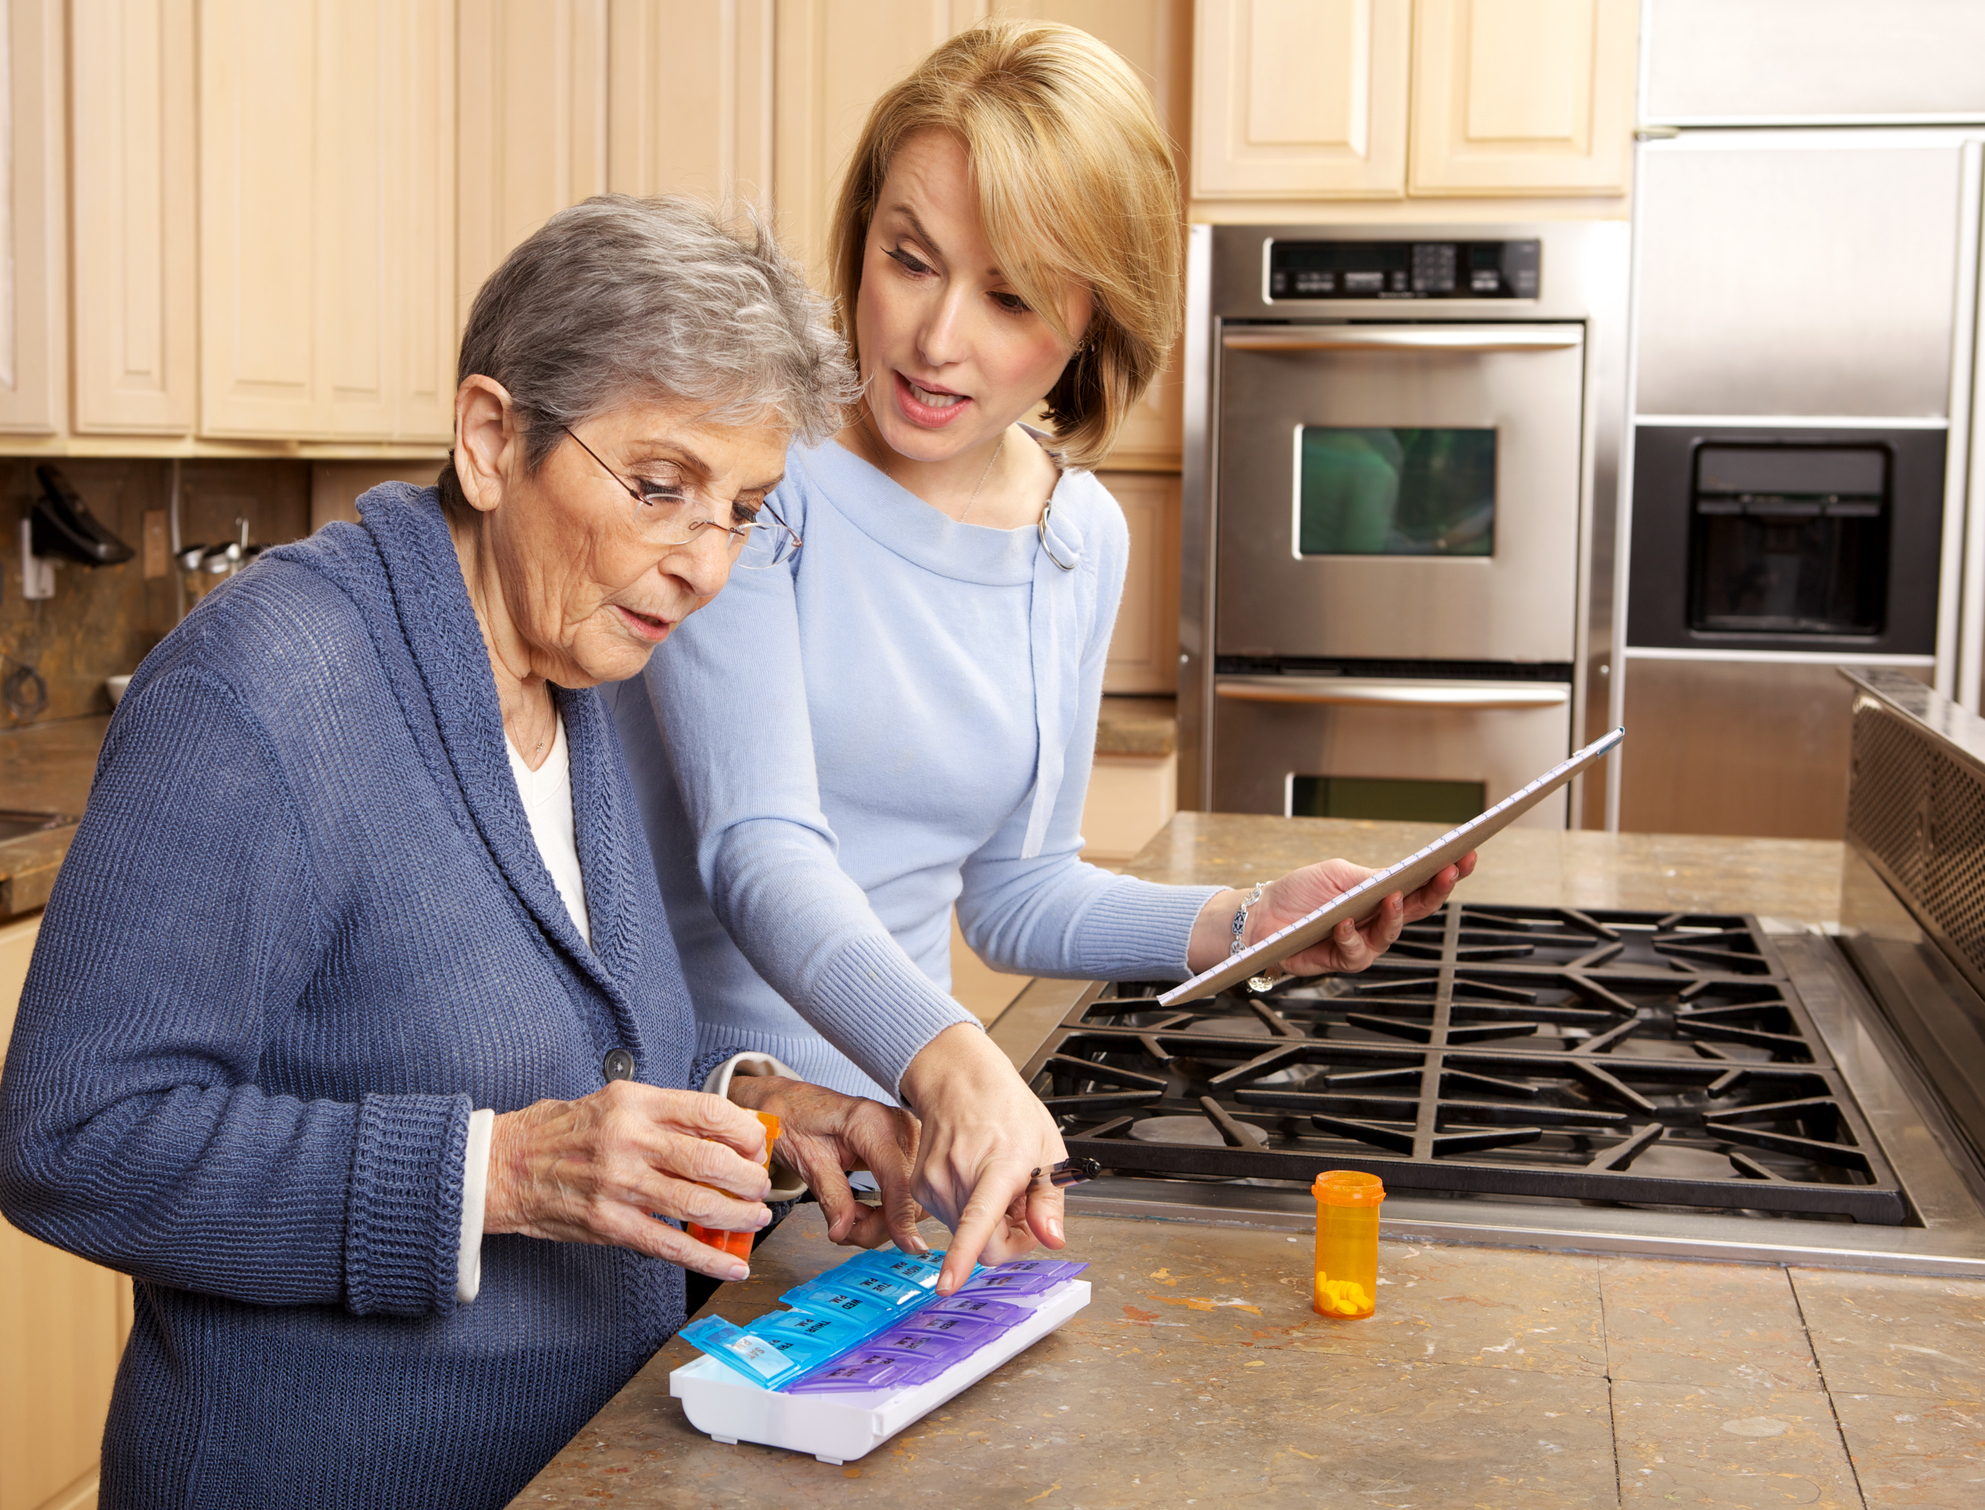 Young woman helping senior in kitchen to sort her medications